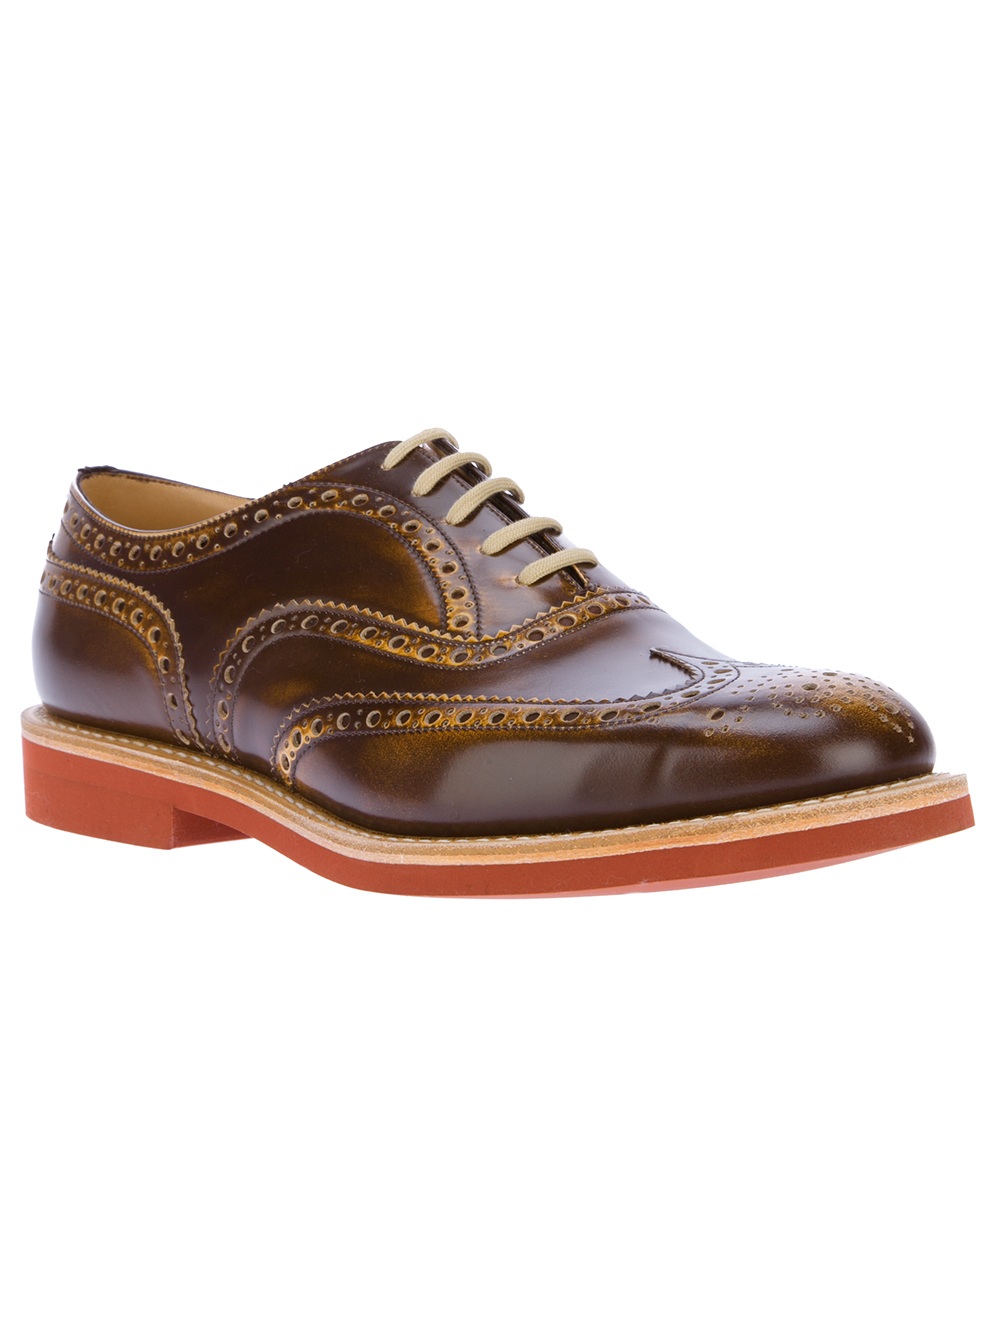 Church's Downish Brogue Shoe in Brown for Men - Lyst